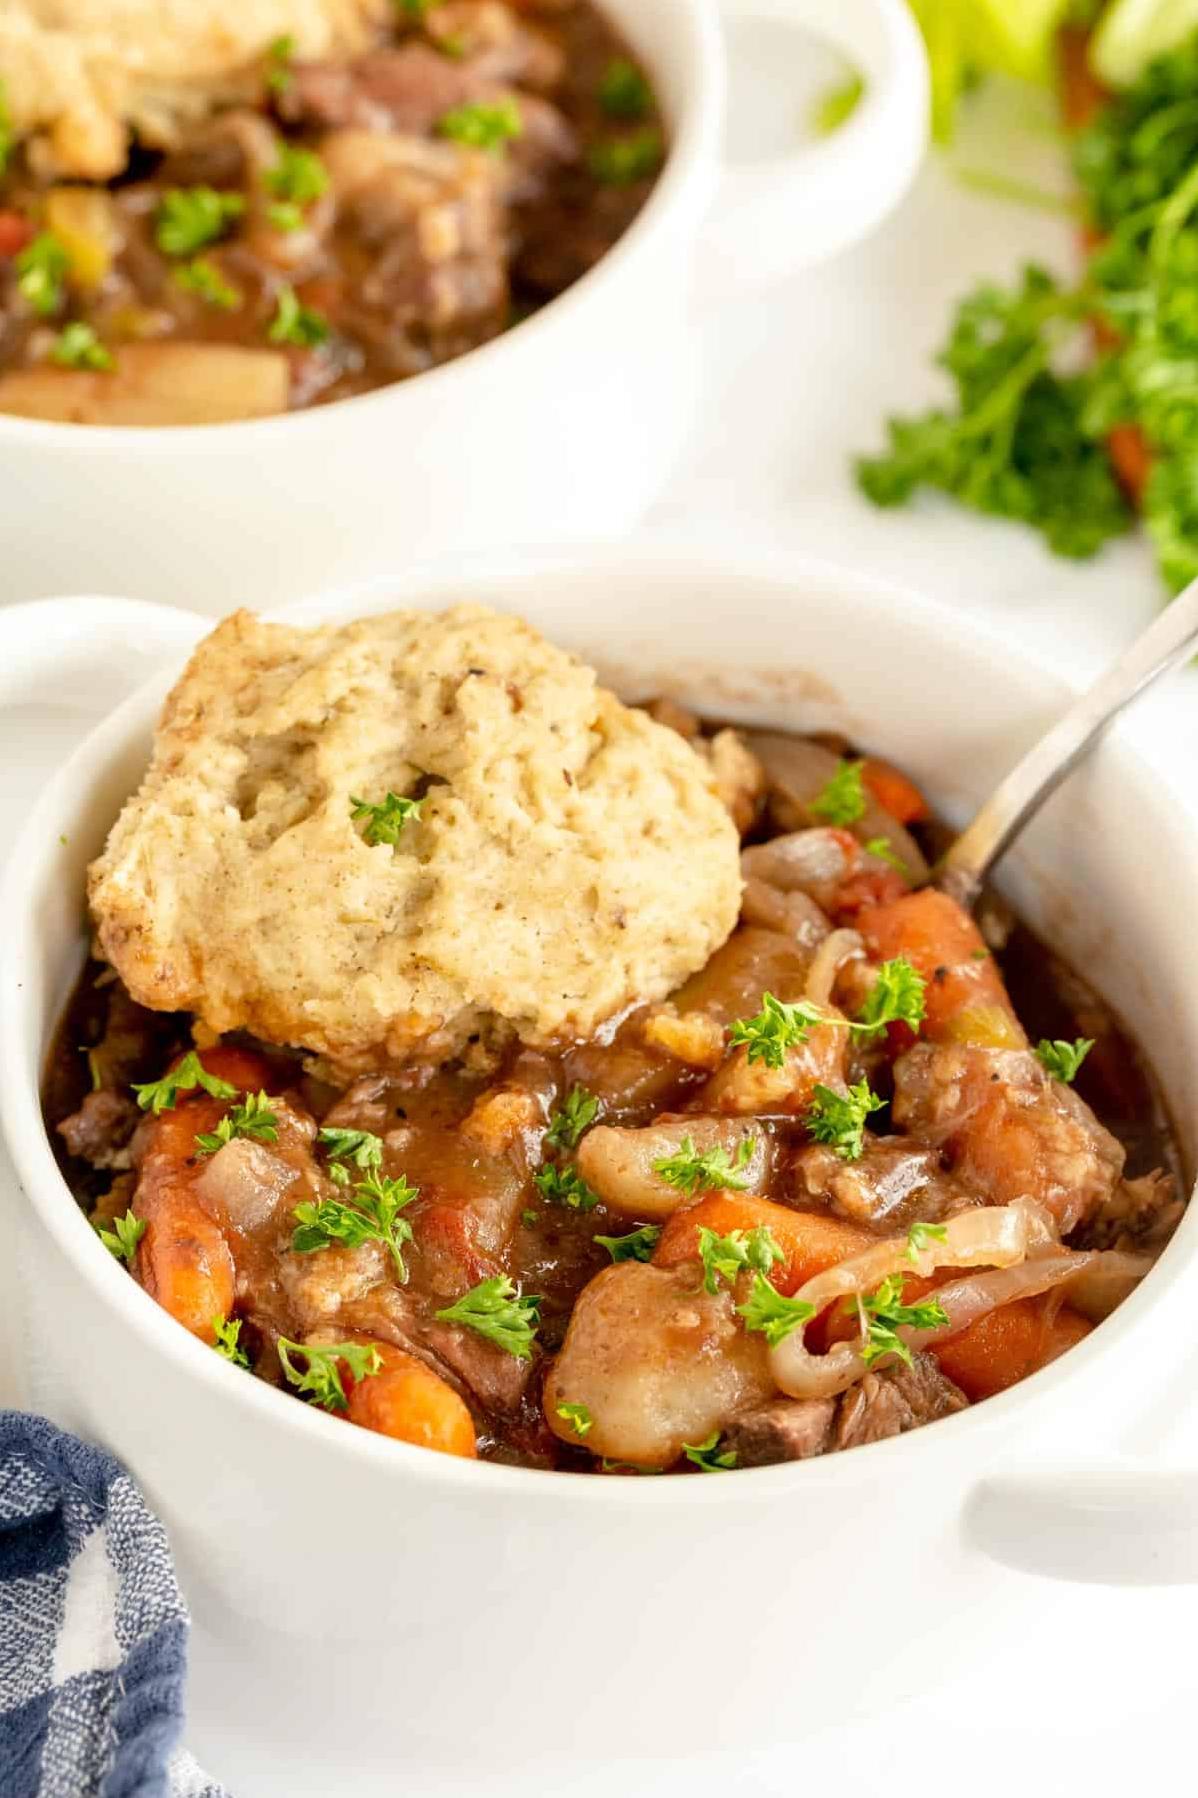 Delicious Beef Stew Recipe: Perfect for Winter Nights